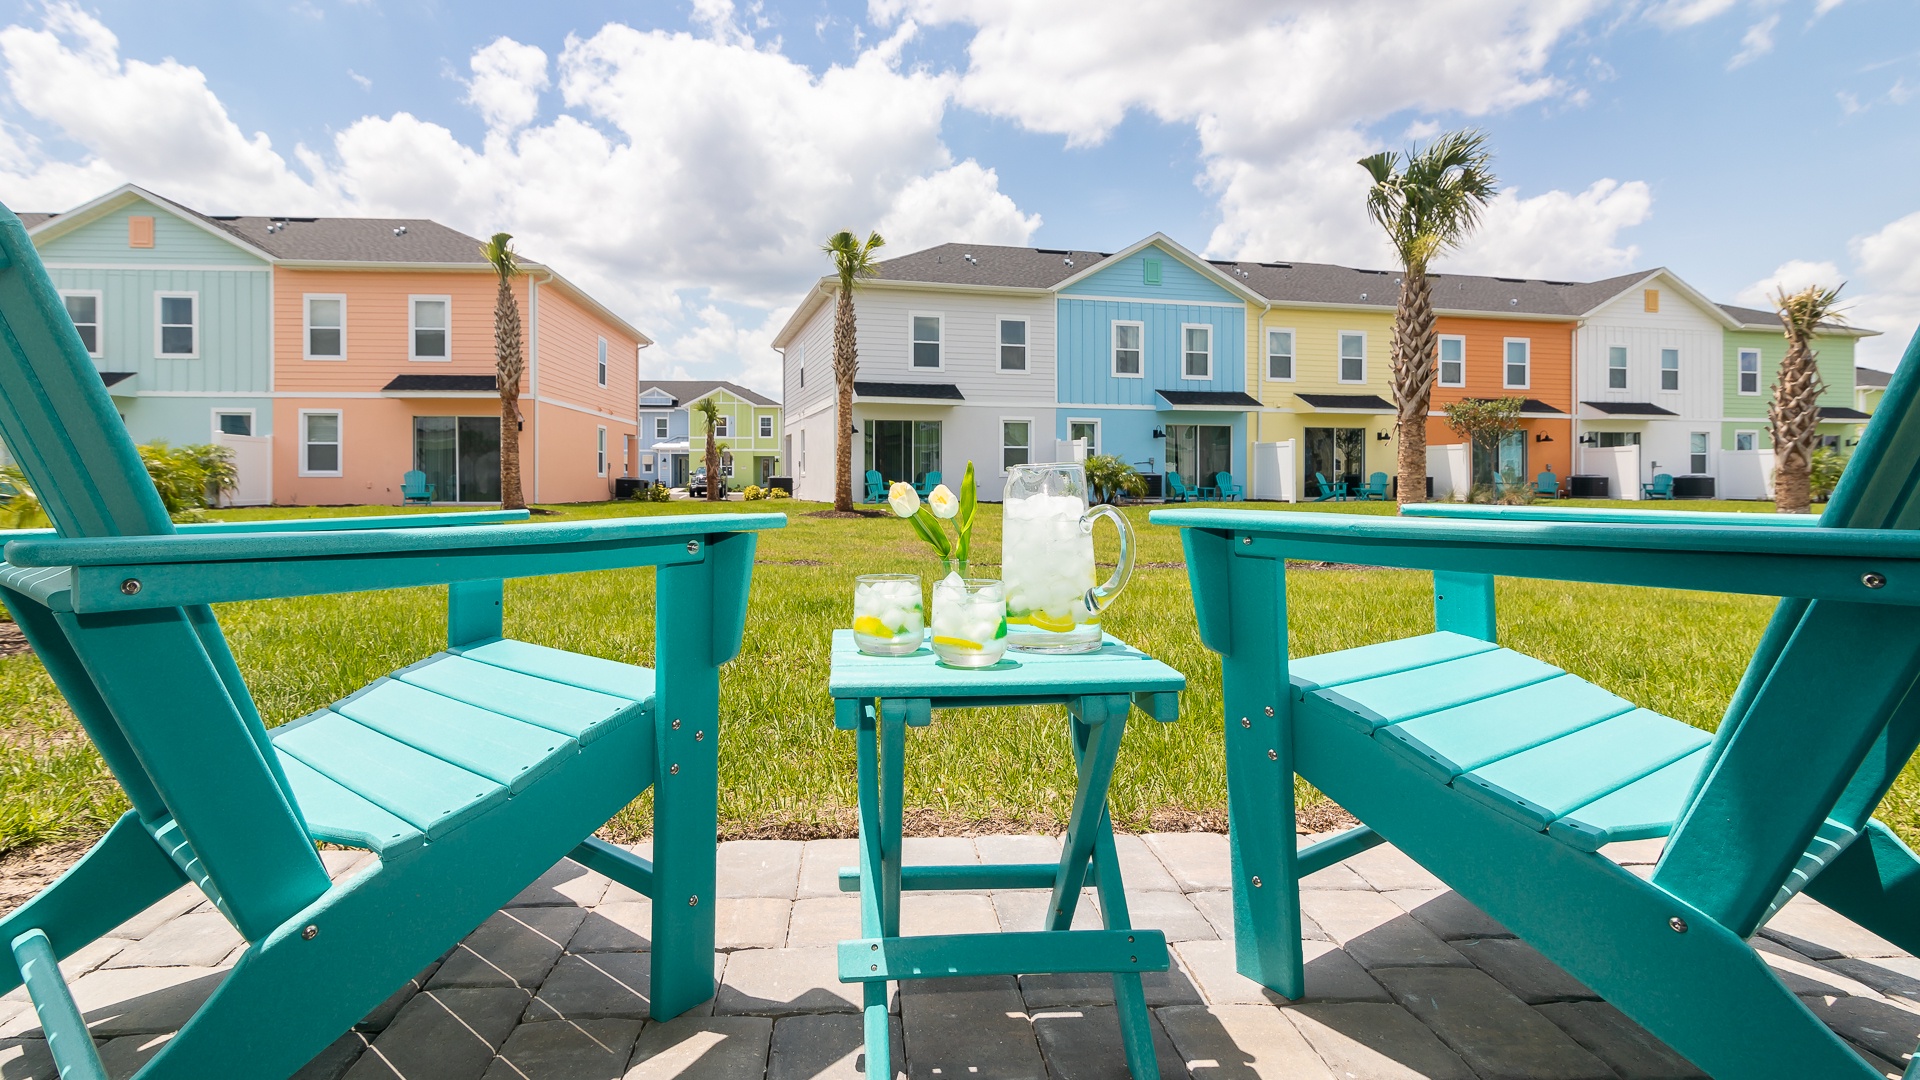 Lounge the day away in Margaritaville out back, with Adirondack seating for 2